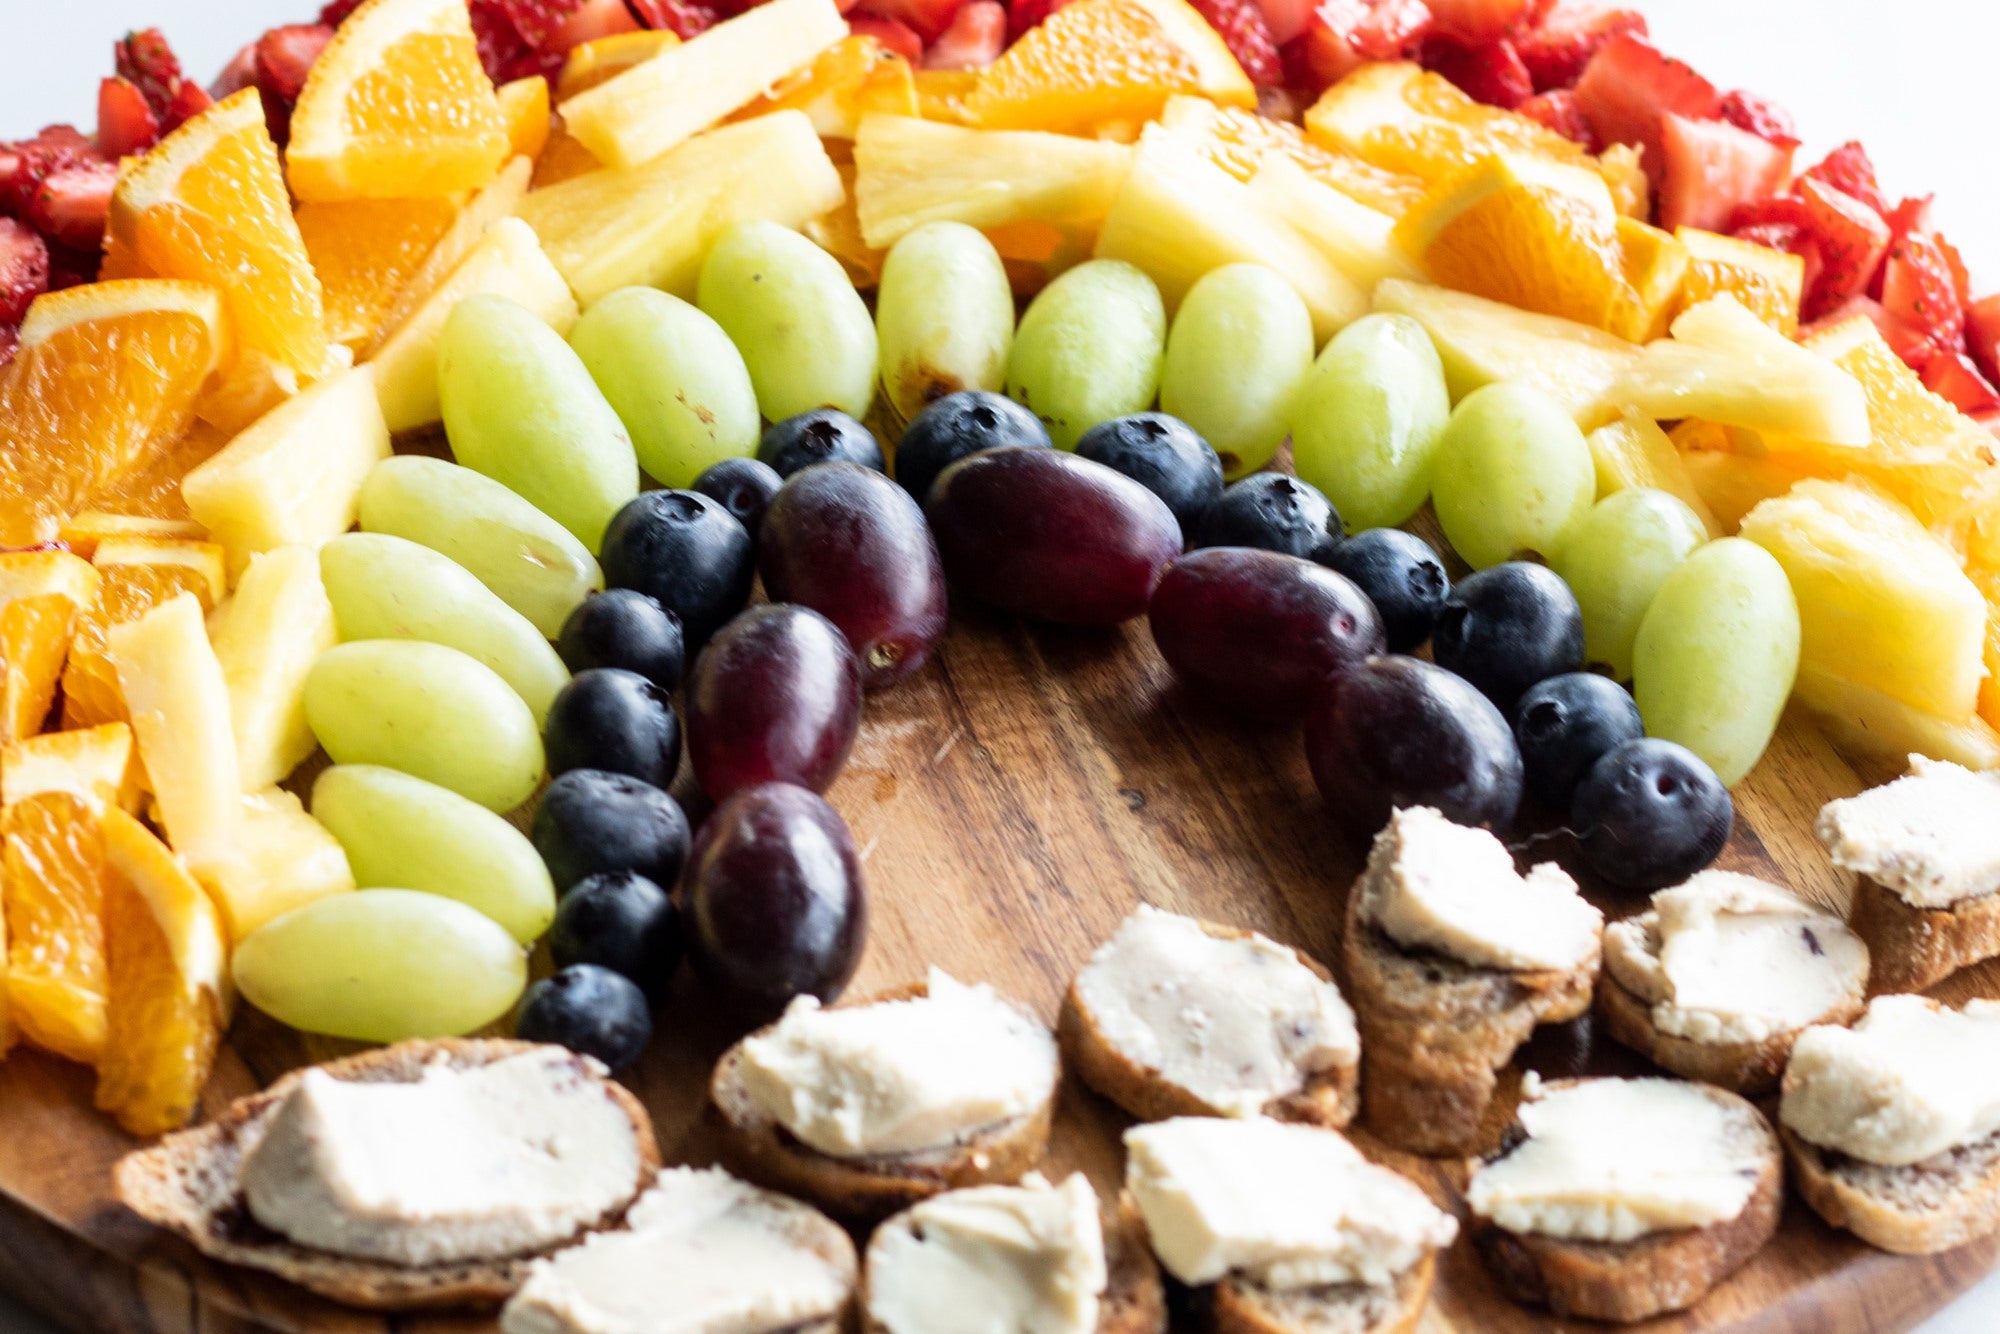 Platter of fruits arranged in a rainbow shape by color. Dairy-free cheese spread on baguette slices form a cloud shape at the base.